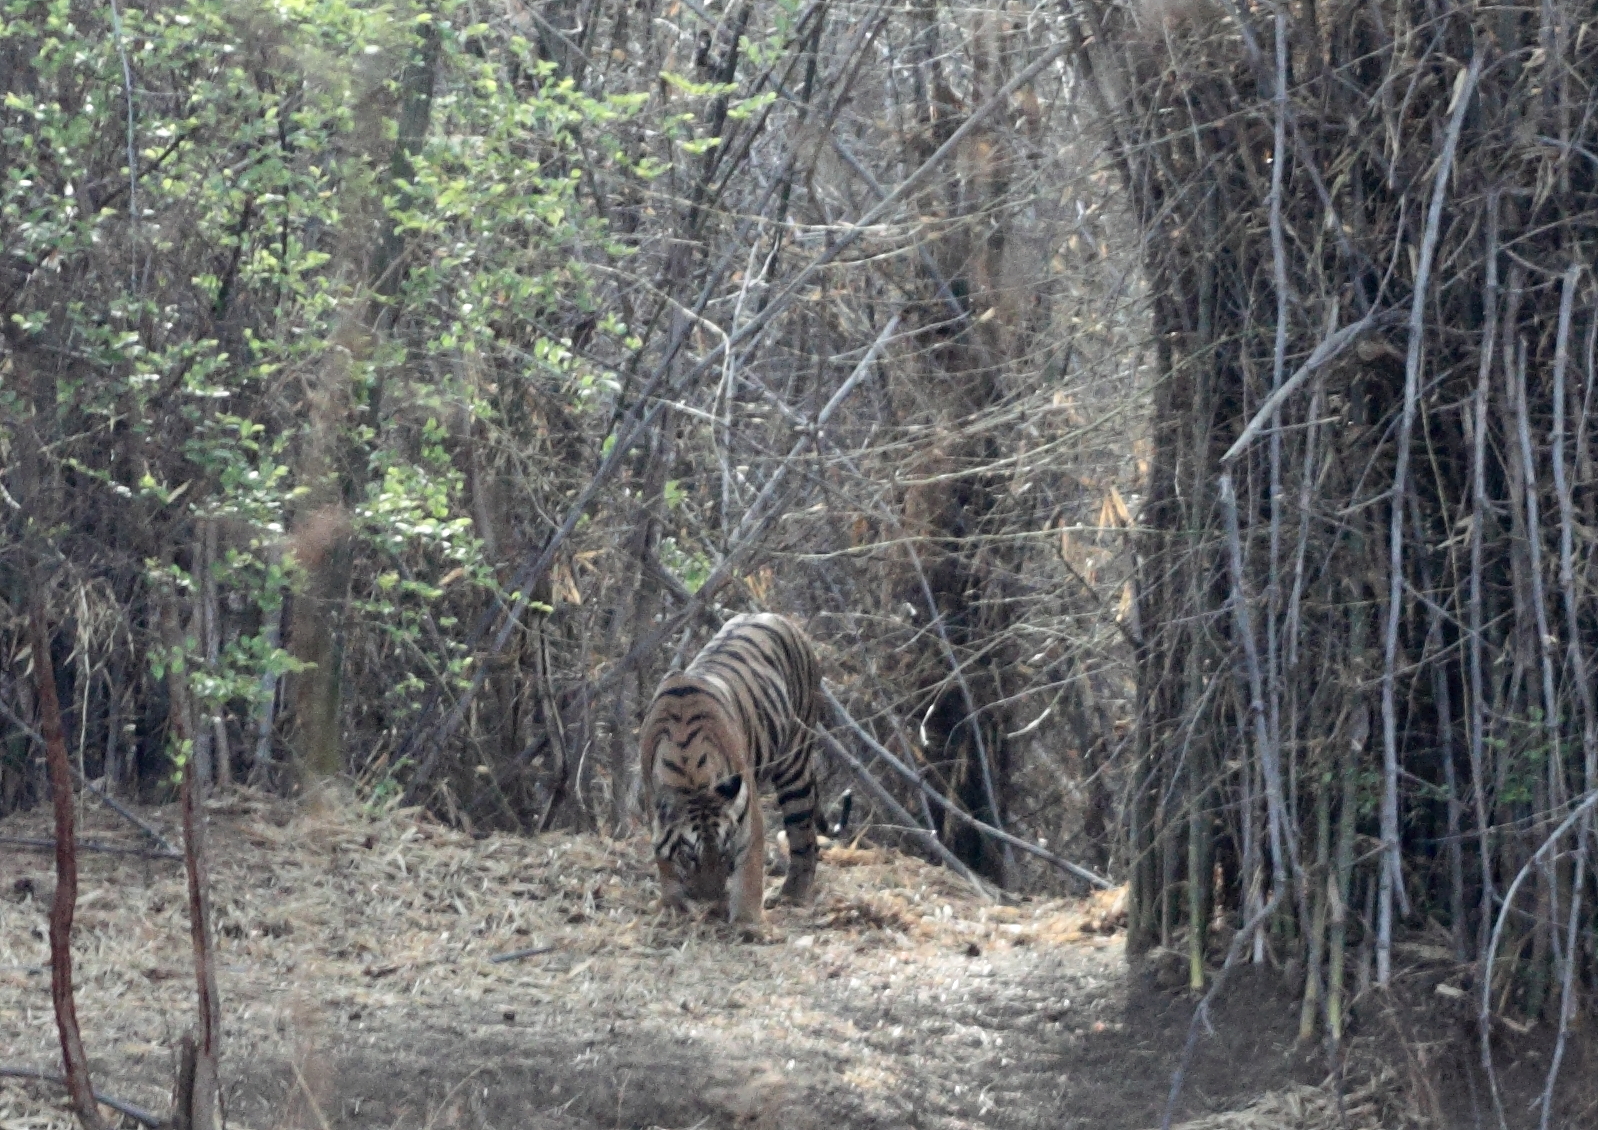 an image of a tiger walking in the woods